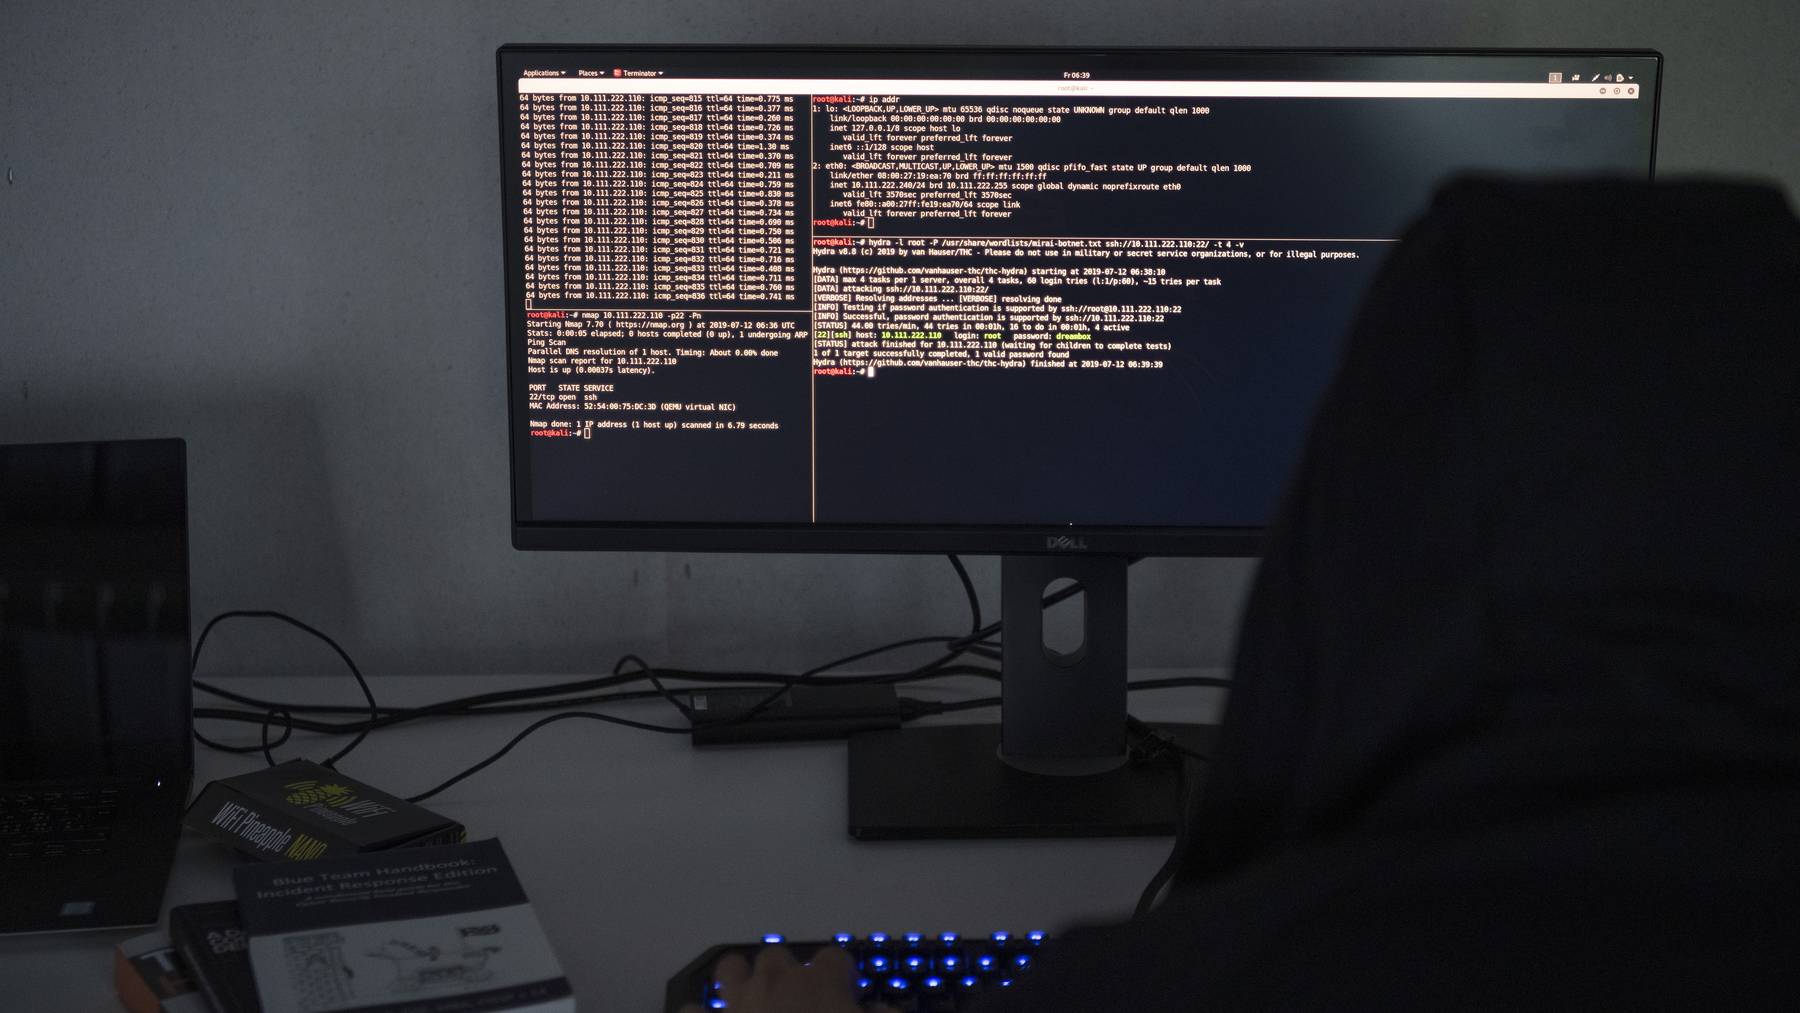 A hacker's computer screen shows «Hydra», a network logon cracker (password cracking tool), photographed on July 12, 2019. / Hacker / Cyberkriminelle